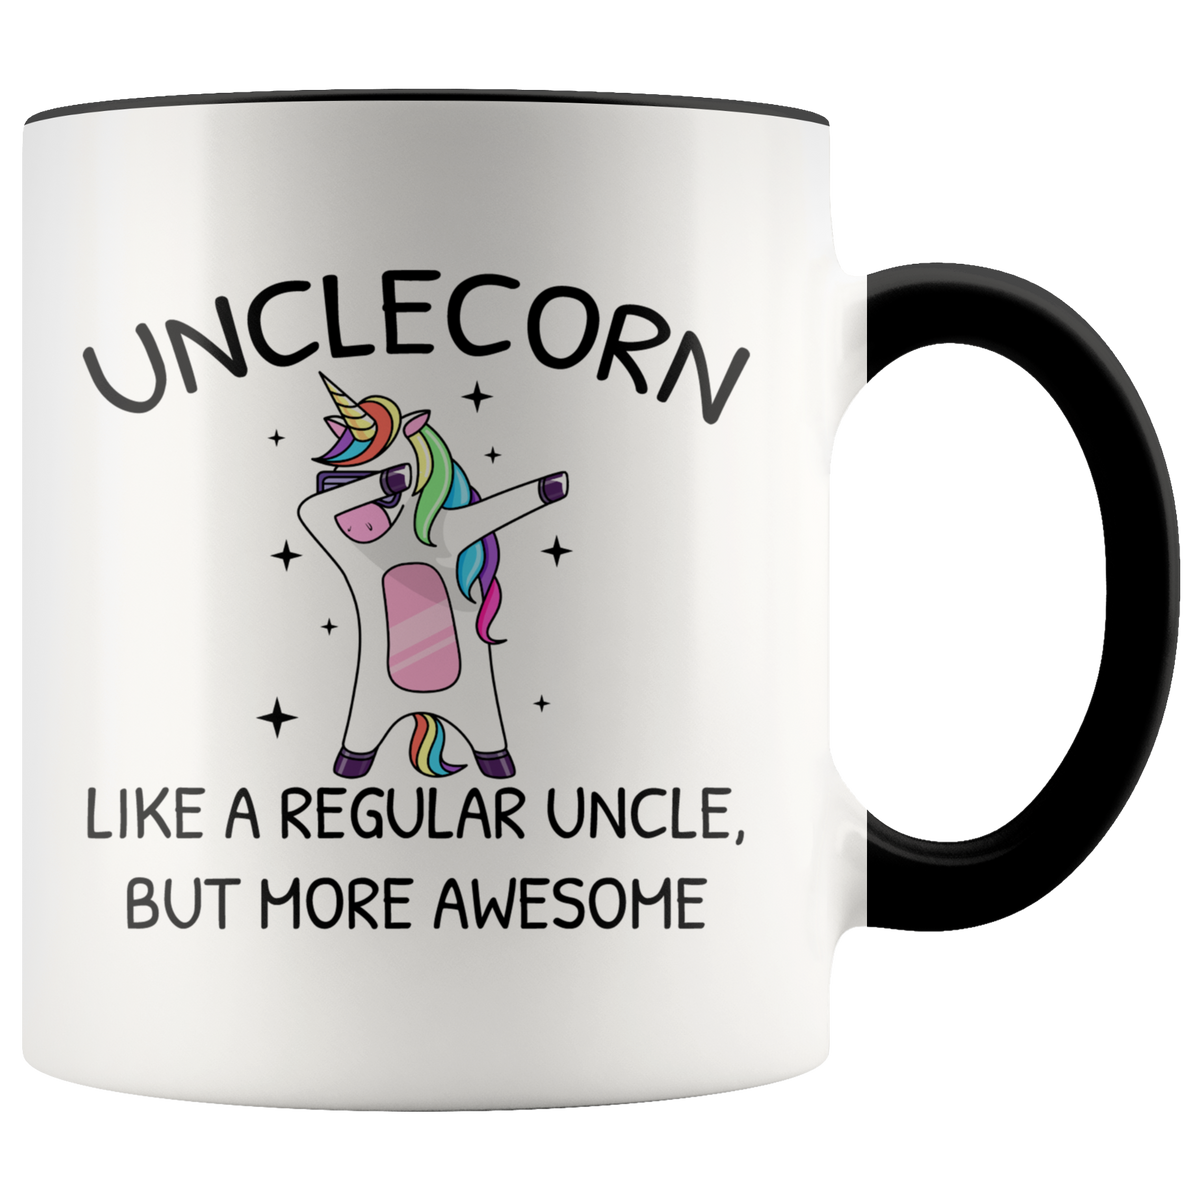 Funny Uncle Gift Uncle Mug - Unclecorn Like A Regular Uncle But More Awesome Accent Coffee Mug 11oz (black)